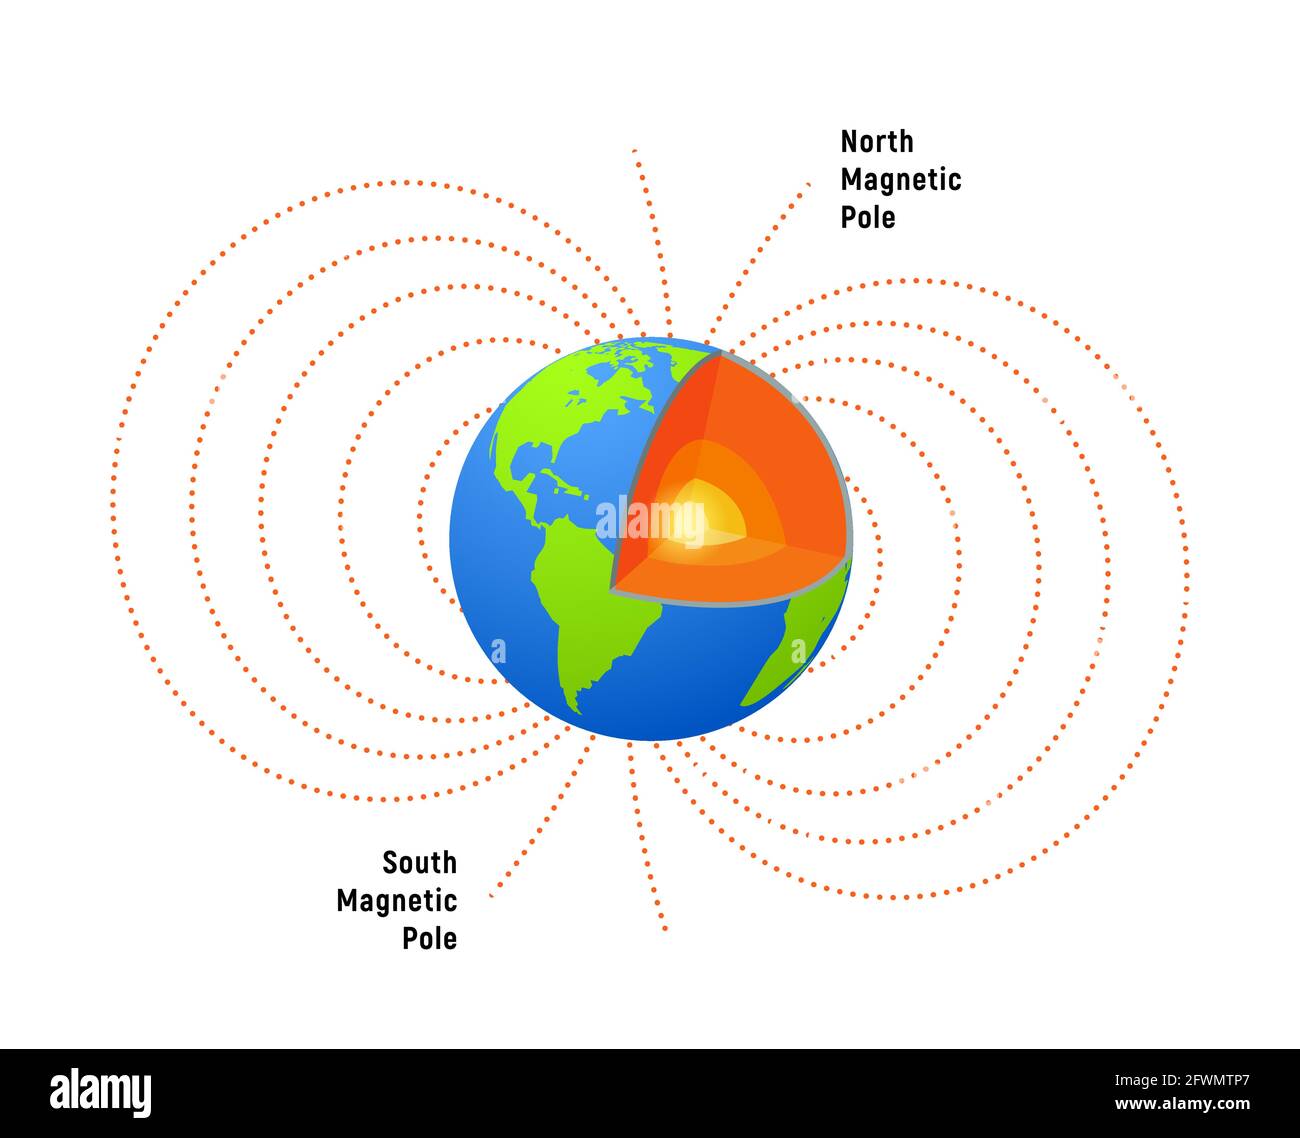 magnetic field of earth diagram